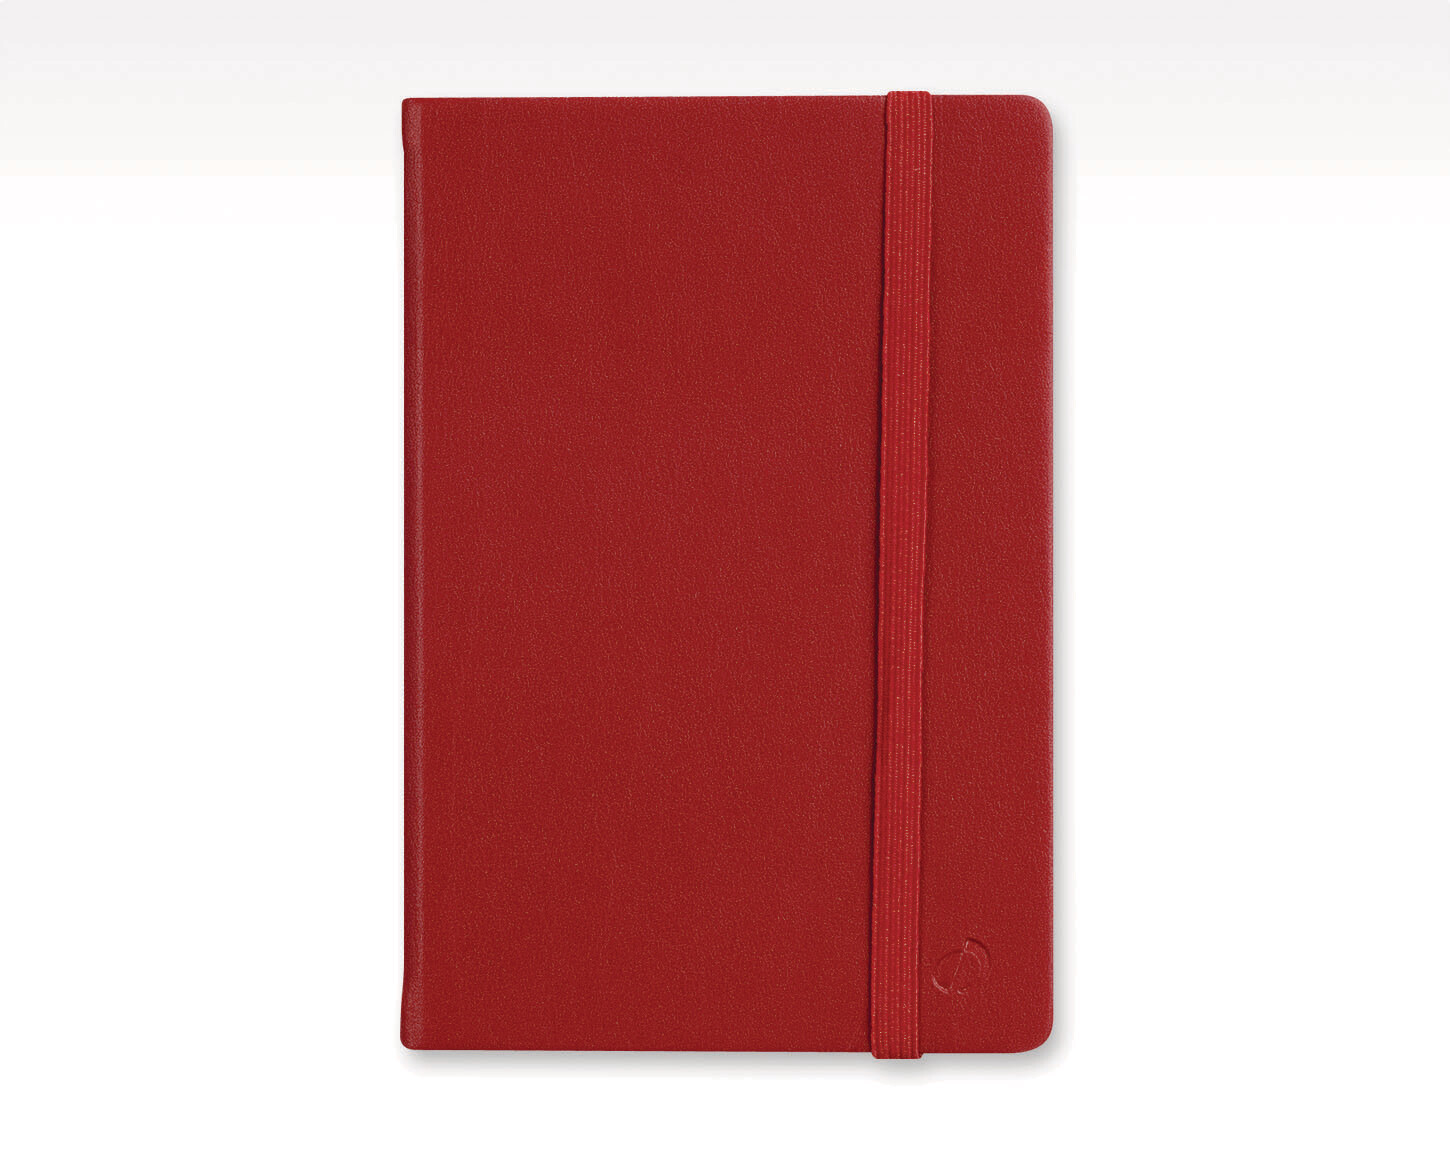 Notebook, Blank, 4" x 6" Red, 192 Pages, Habana